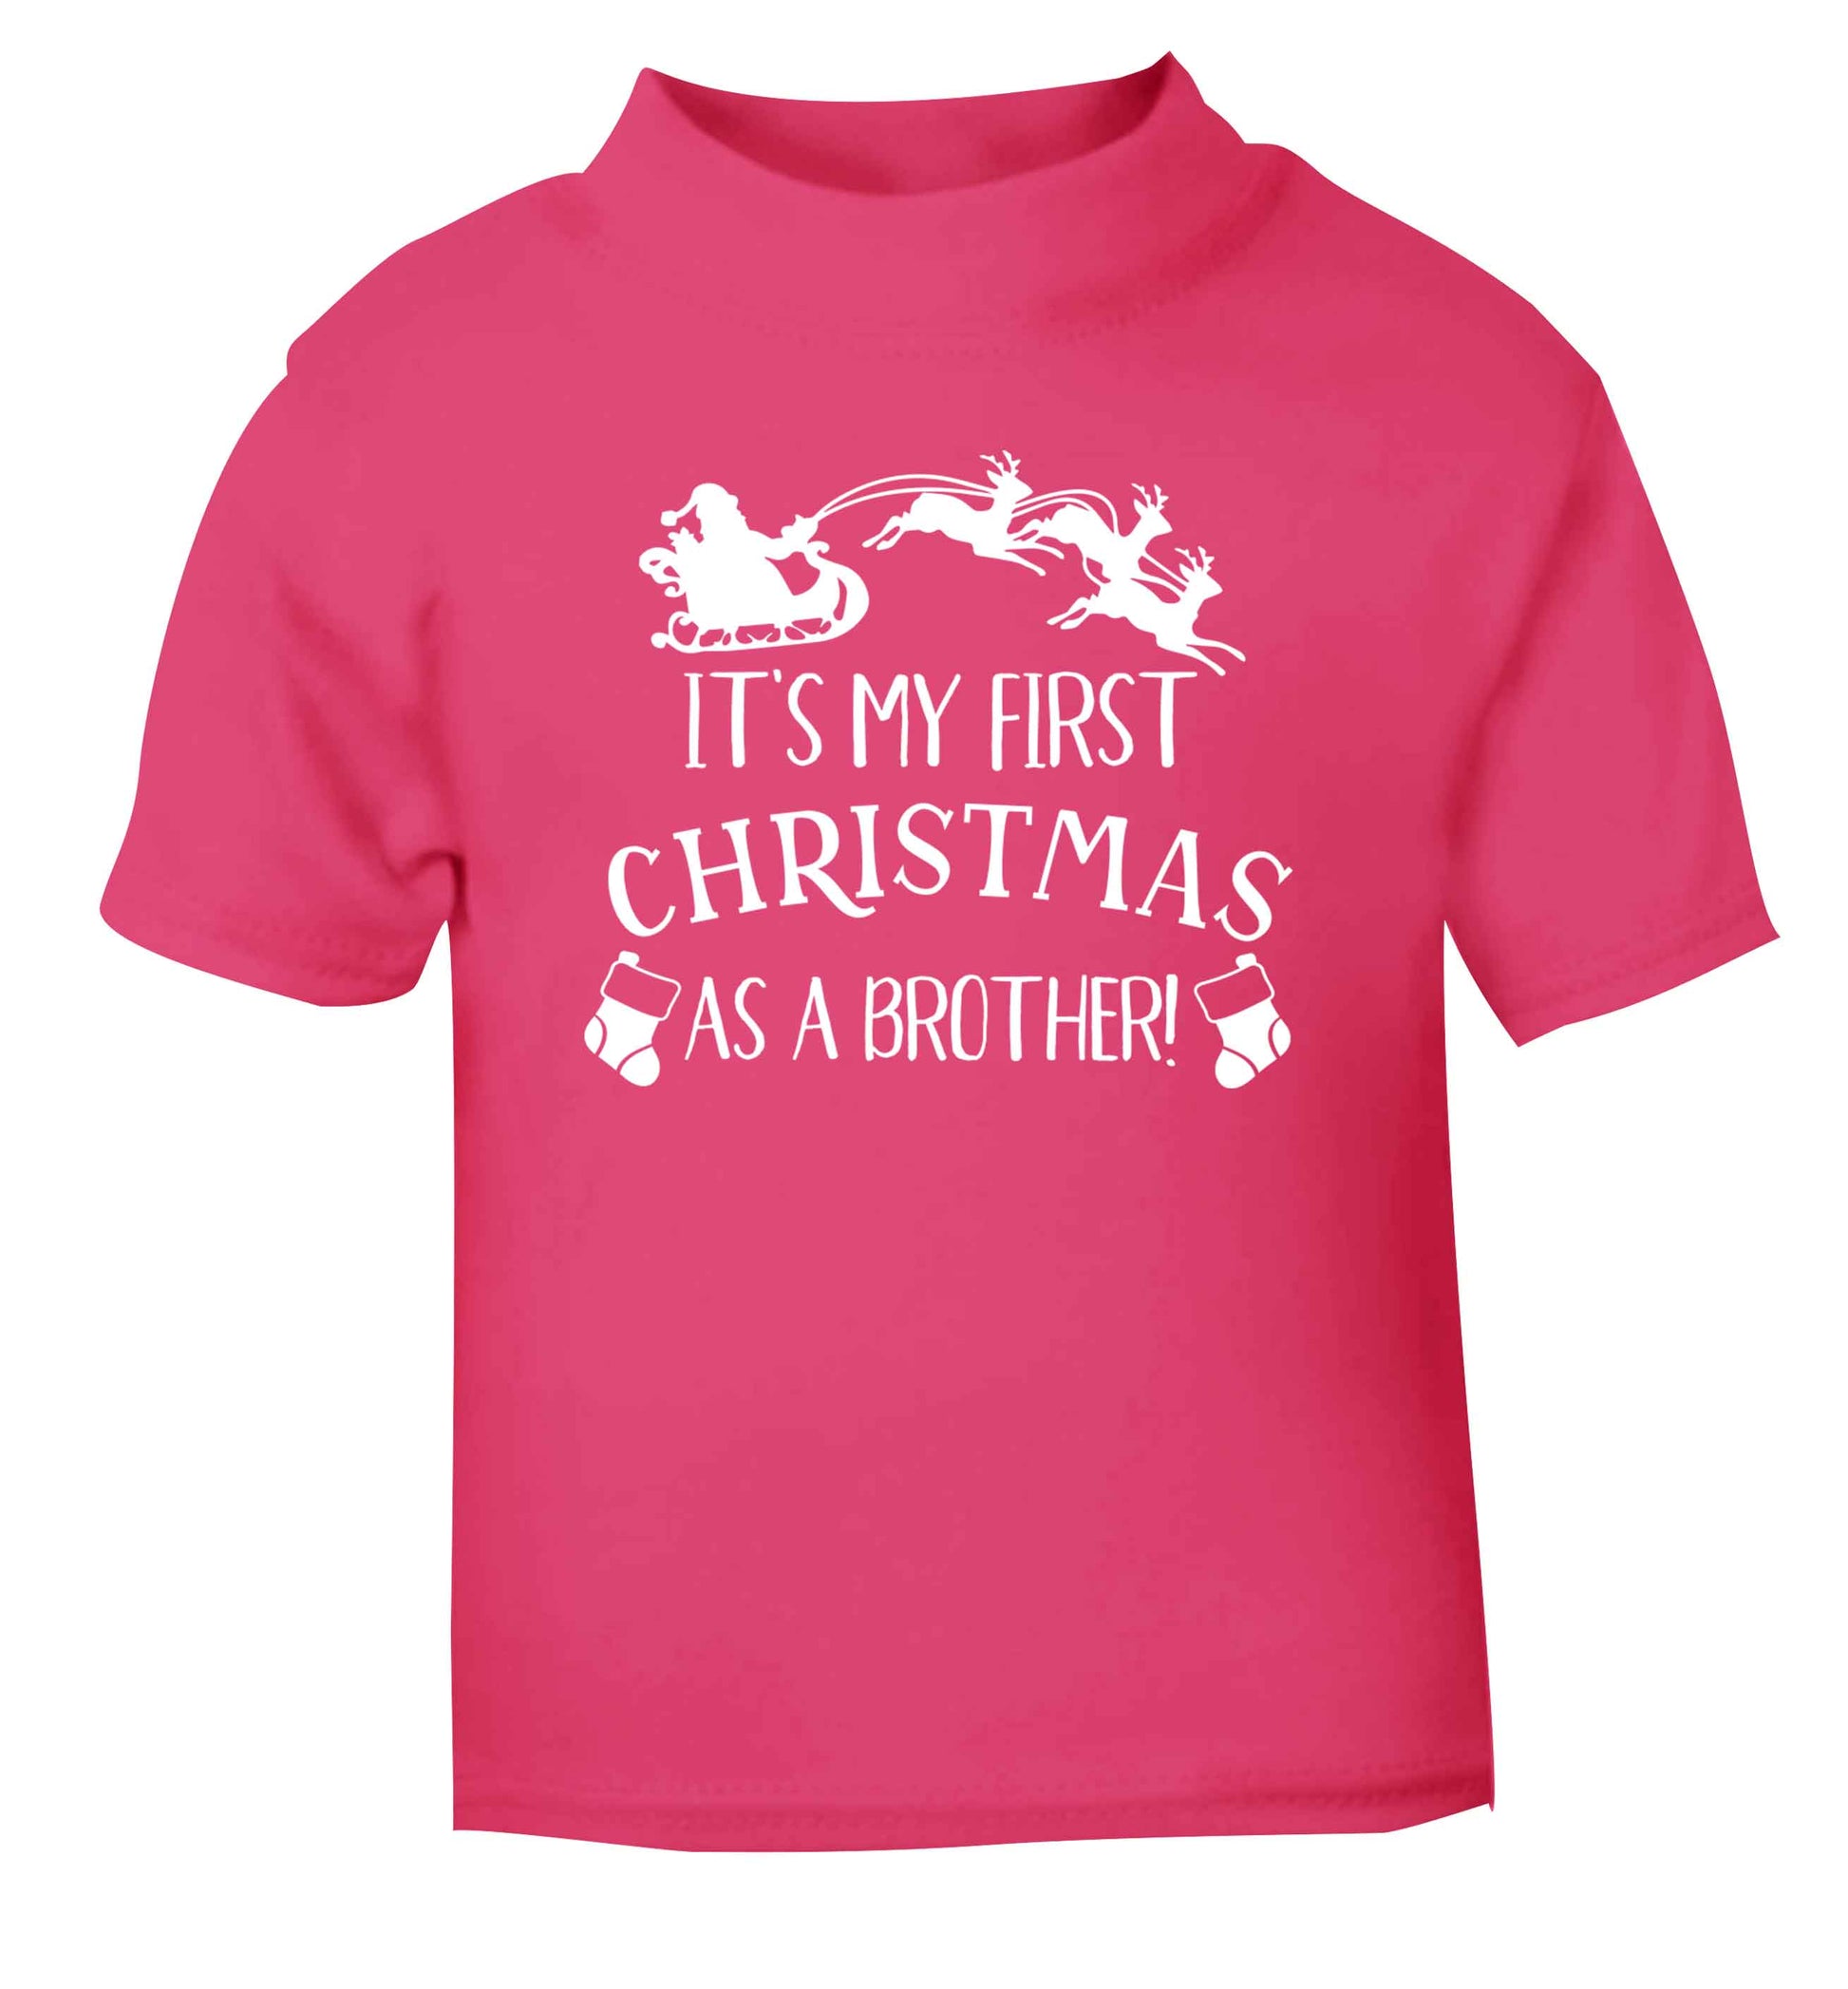 It's my first Christmas as a brother! pink Baby Toddler Tshirt 2 Years